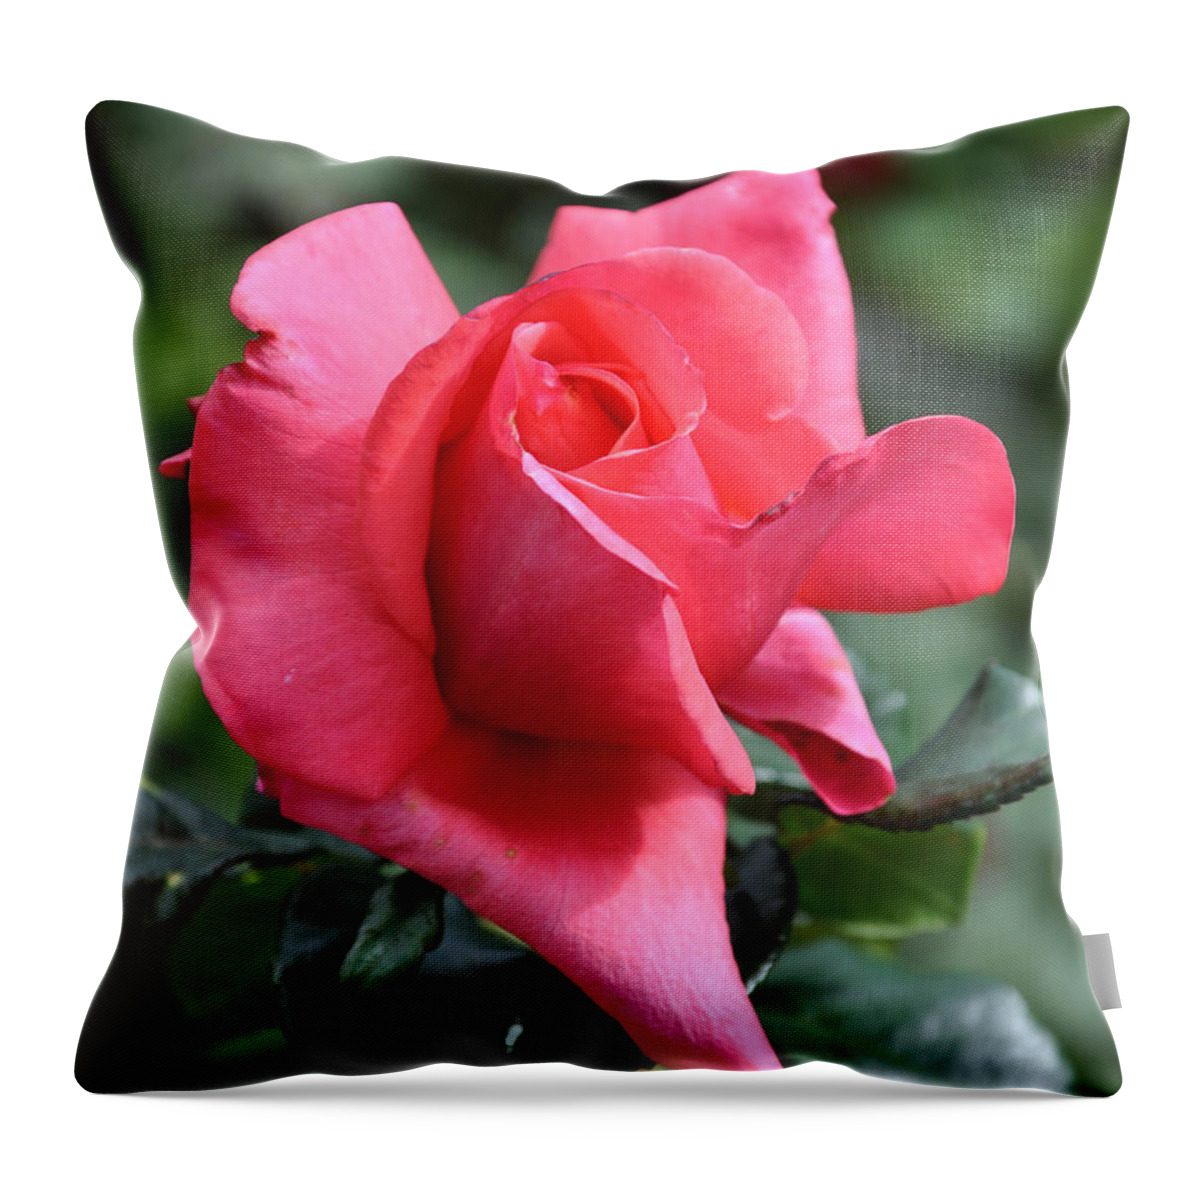 Rose Throw Pillow featuring the photograph Rose Bud by Kirt Tisdale